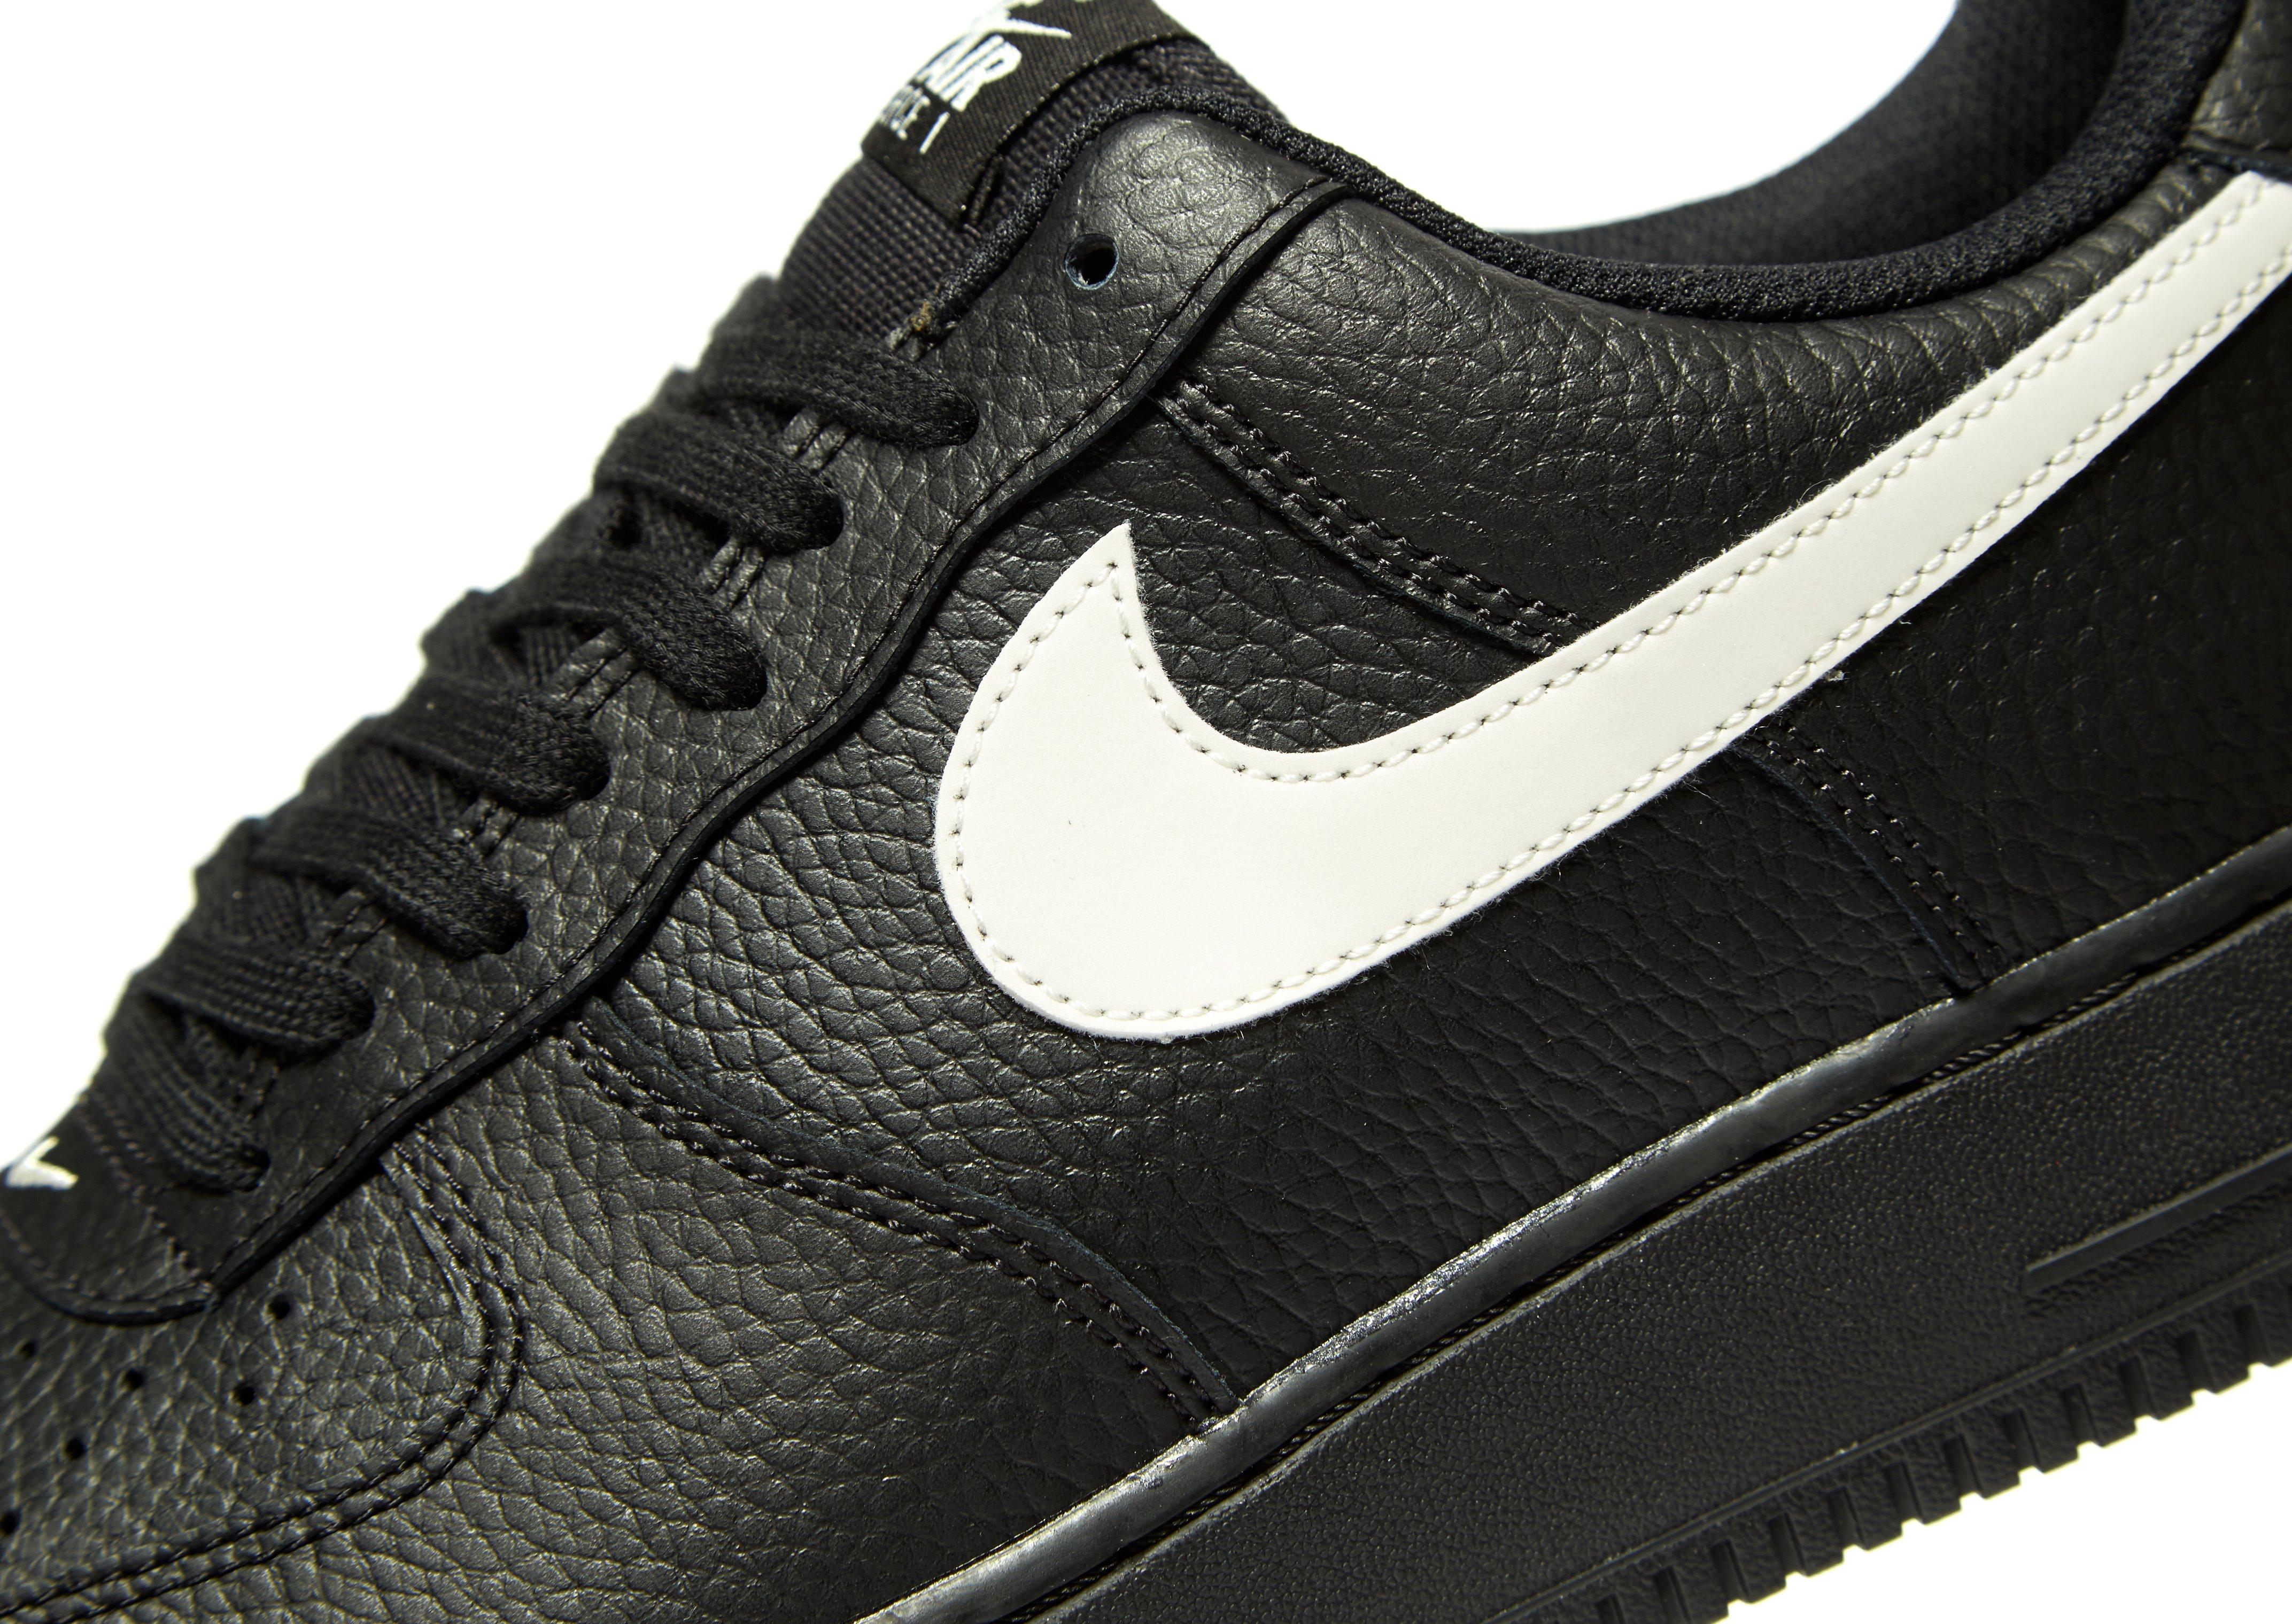 nike air force black with white tick